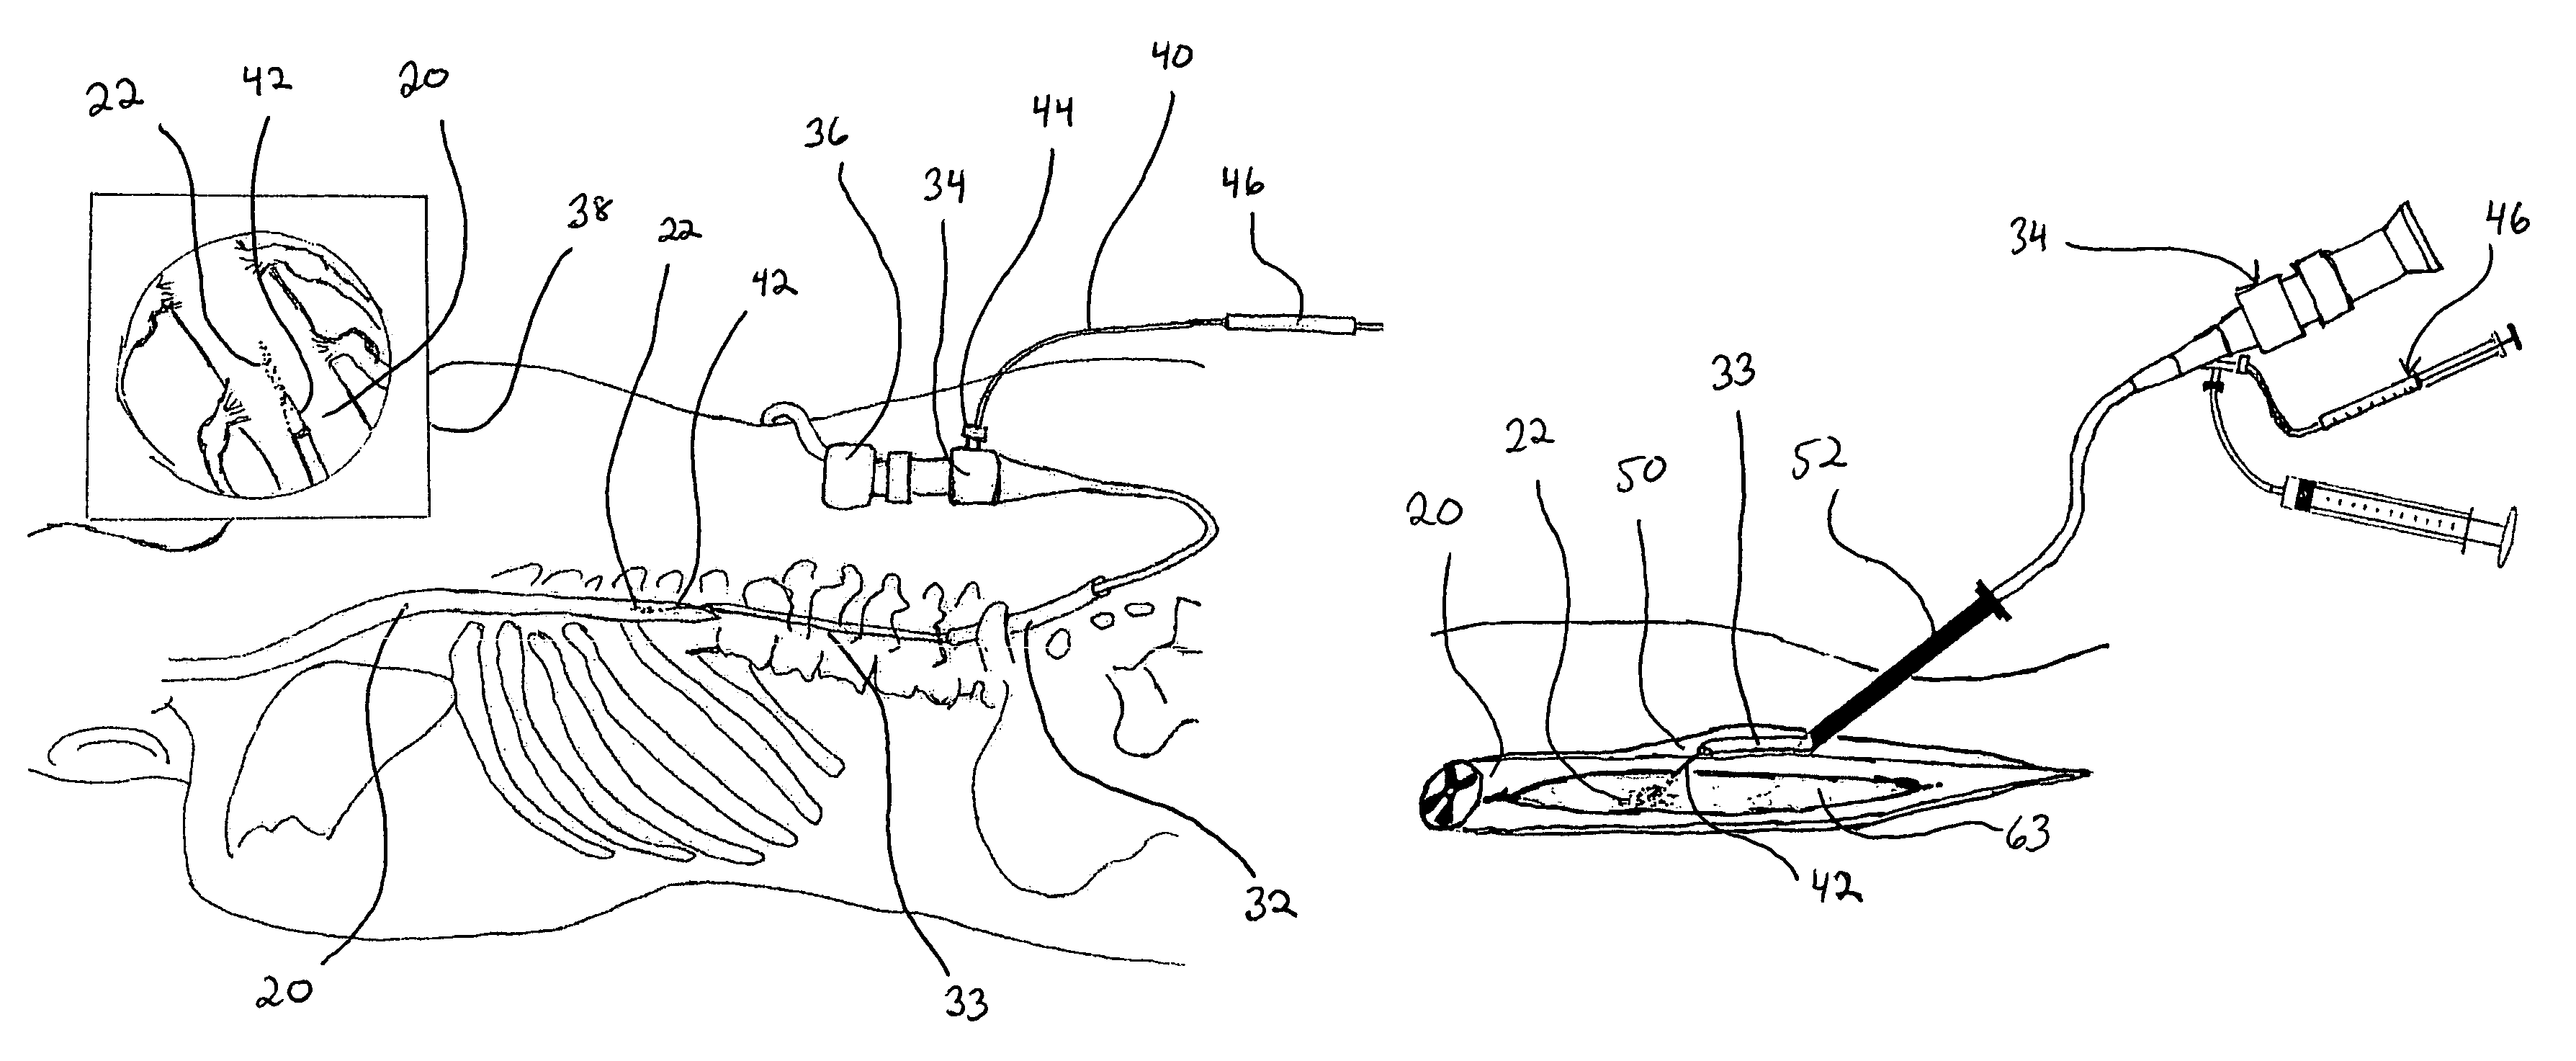 Method and system for cellular transplantation in the spinal cord